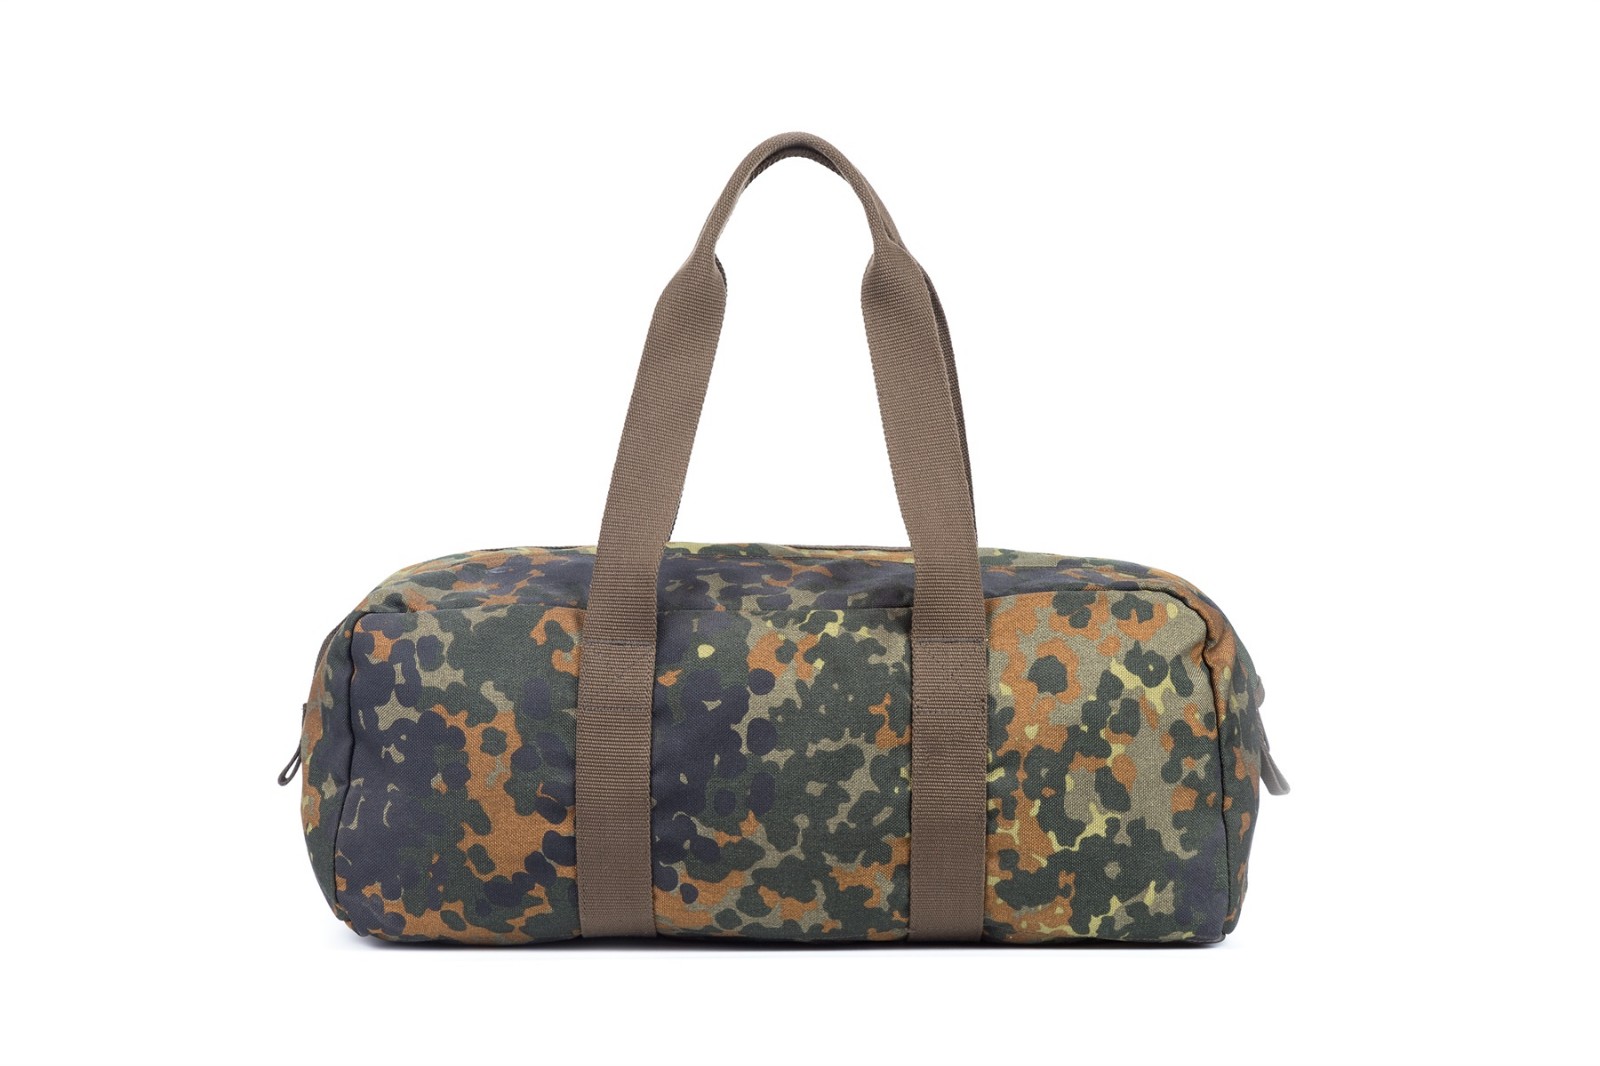 GF bags-Manufacturer Of Military Gear Bags, Military Tactical Bag On GF Bags